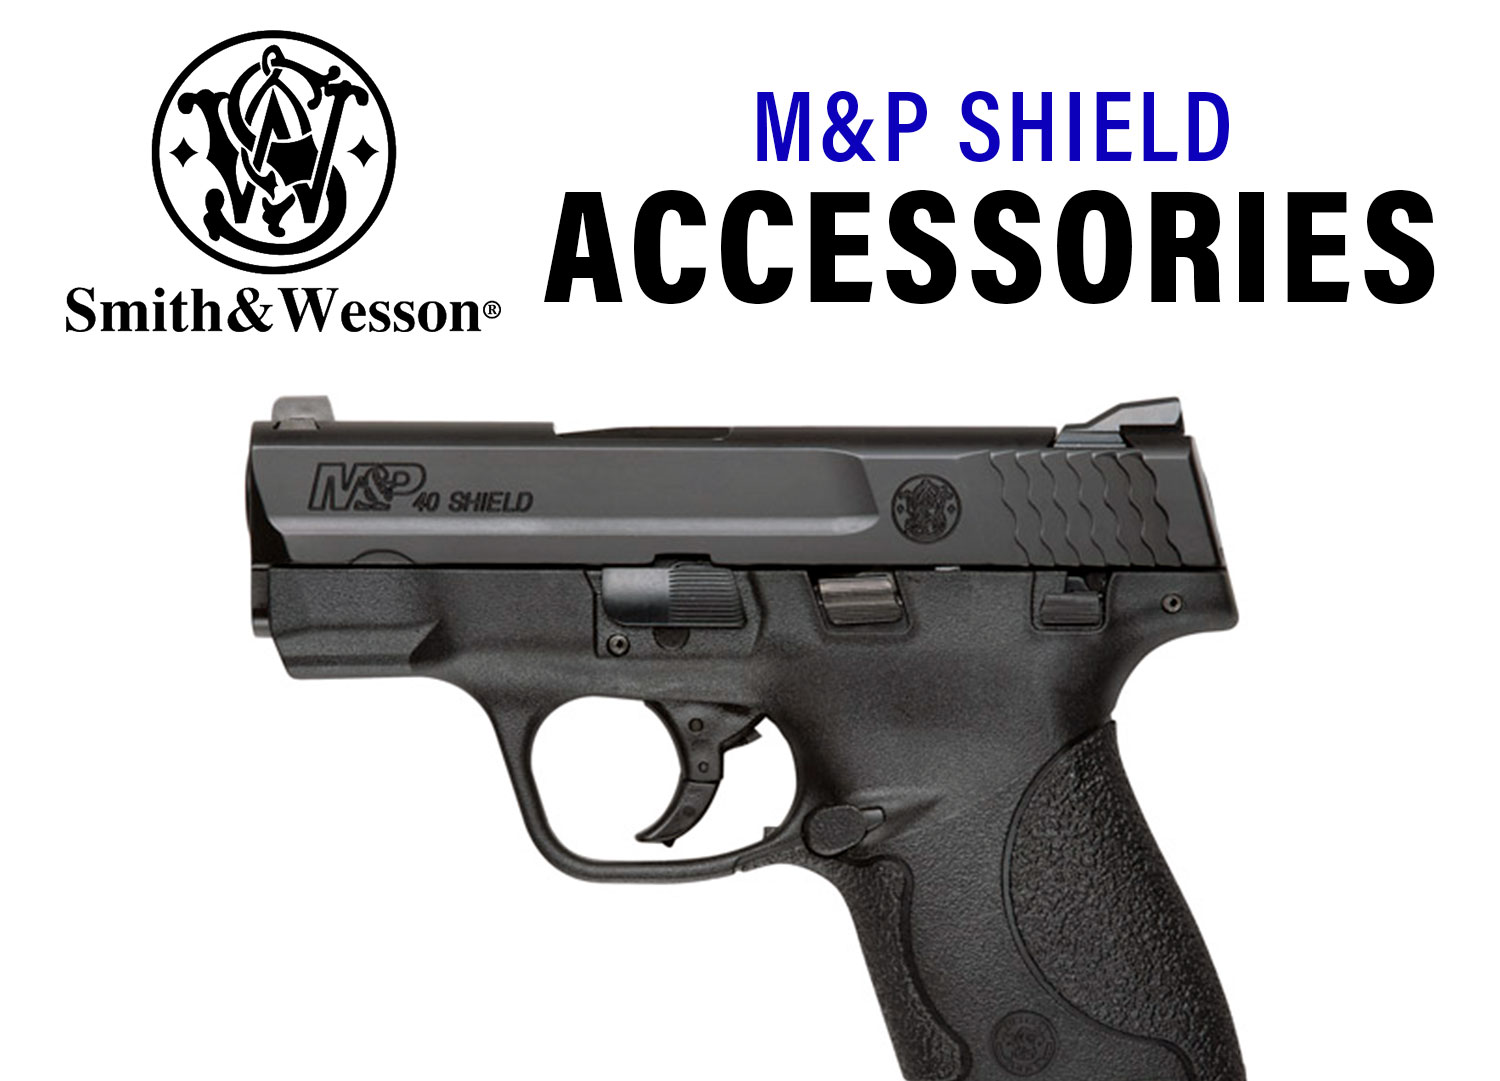 Smith and Wesson M&P Shield Accessories